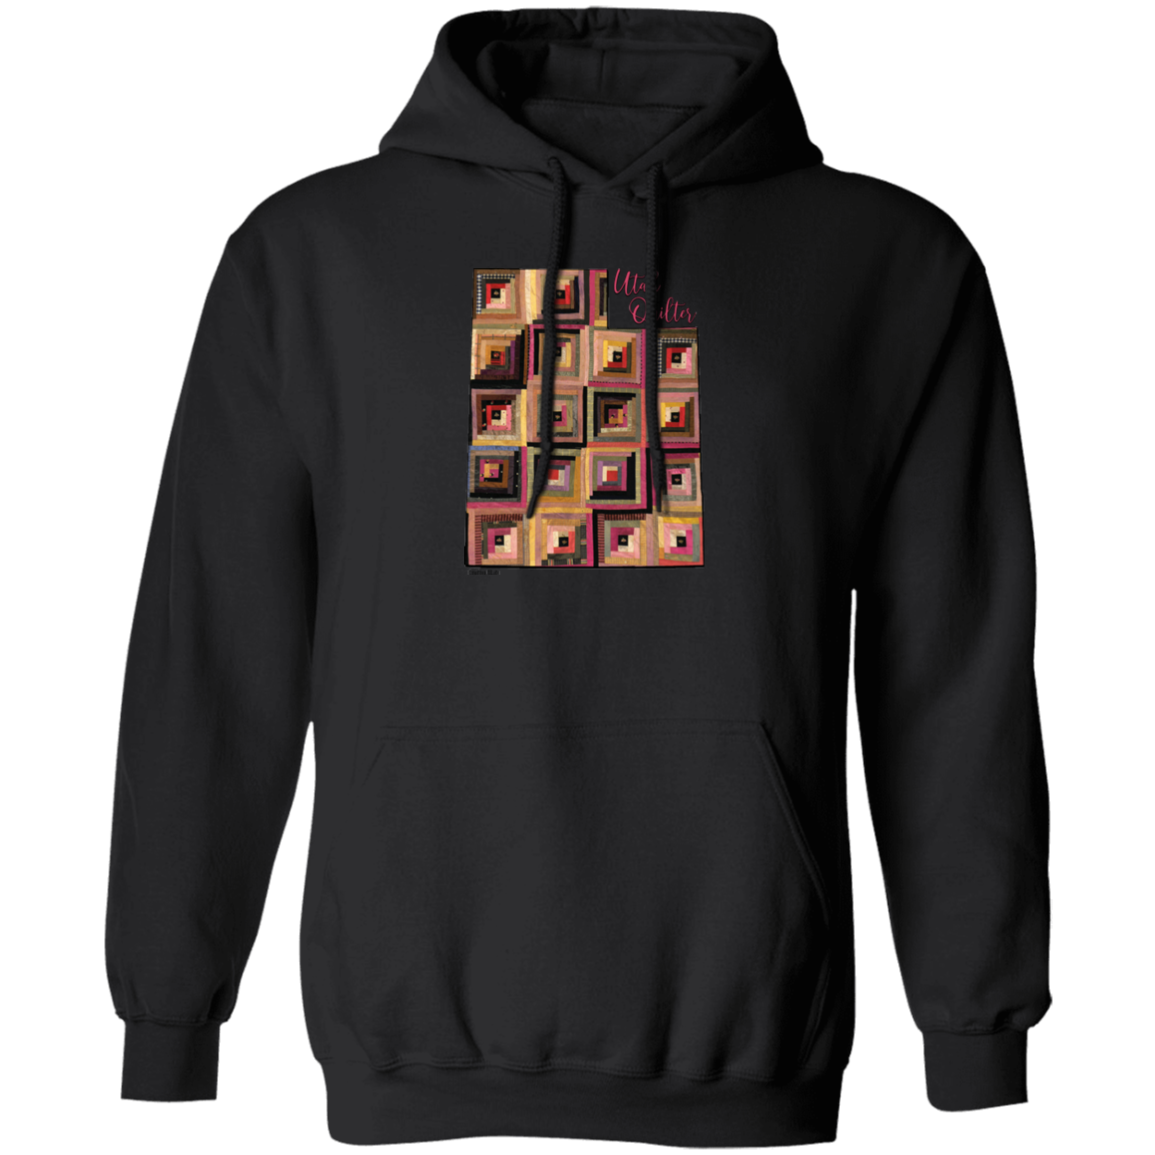 Utah Quilter Pullover Hoodie, Gift for Quilting Friends and Family